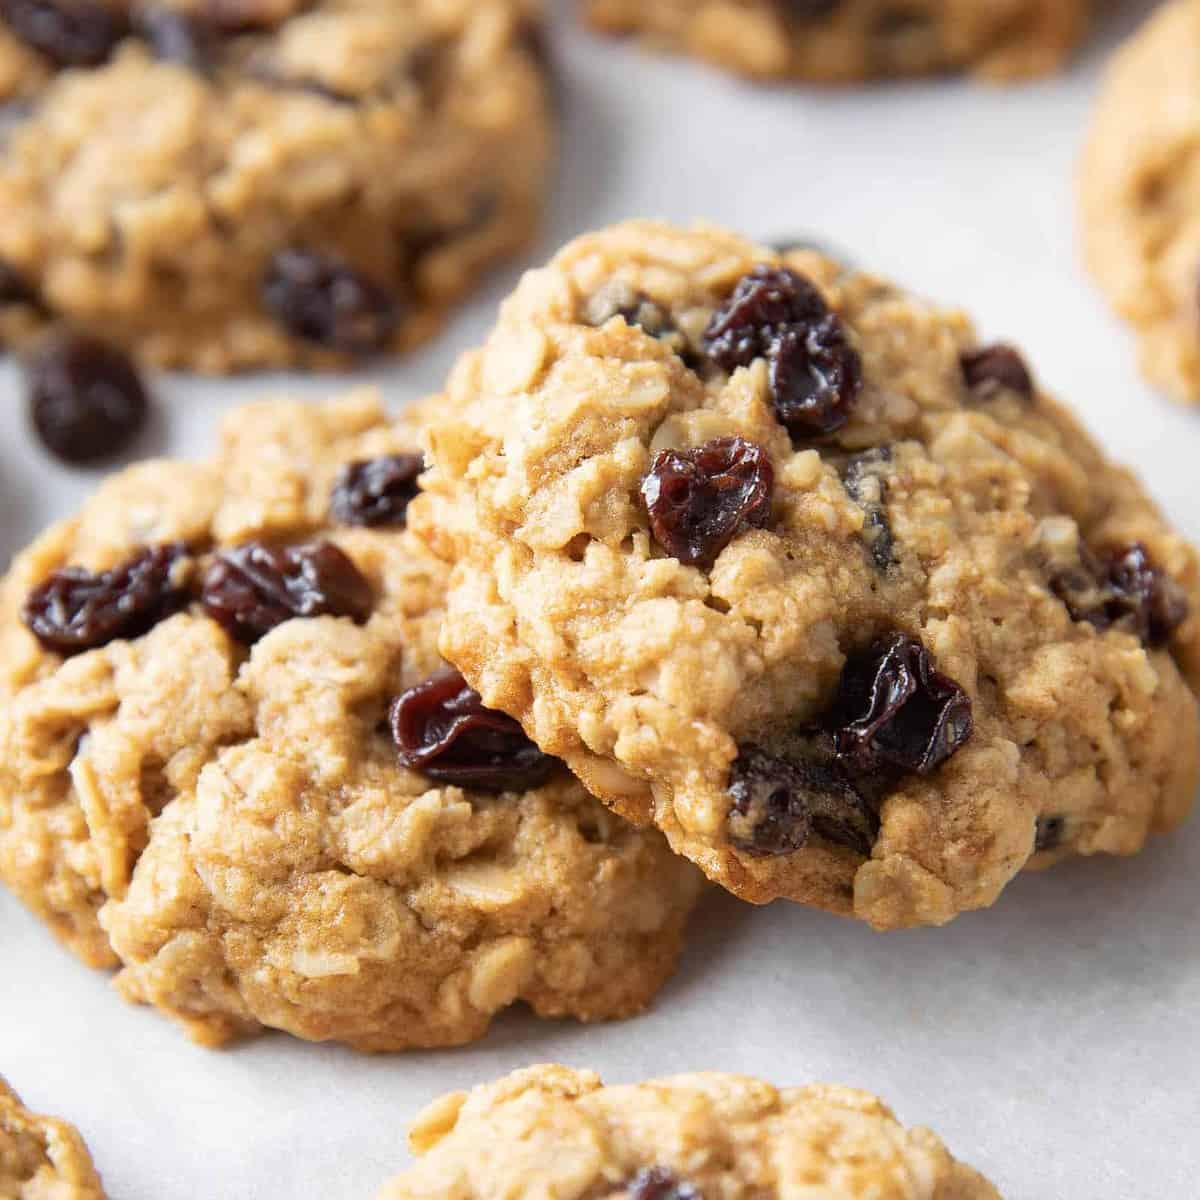 Sure thing! Here are 11 unique photo captions for our gluten-free vegan sugar-free oatmeal cookies recipe: